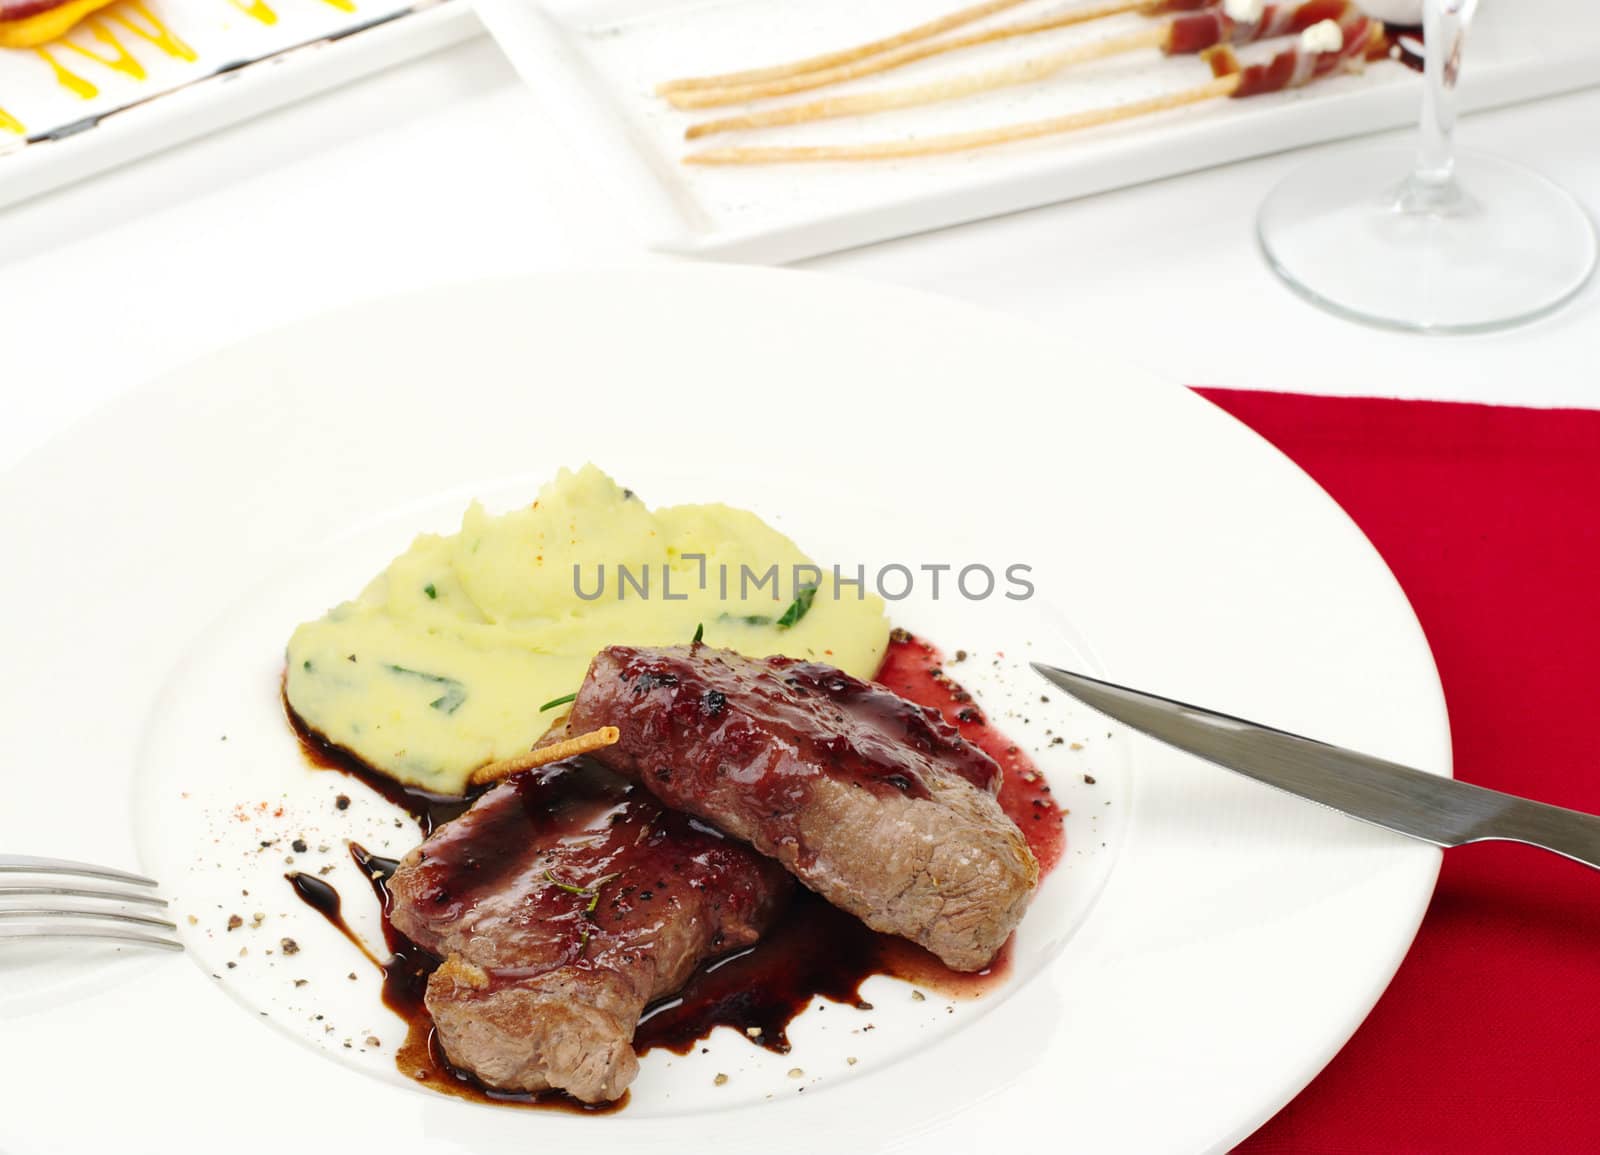 Main dish: Meat with red pepper sauce and mashed potato with cutlery as well as appetizers and wine glass in the background  (Selective Focus, Focus on the meat)